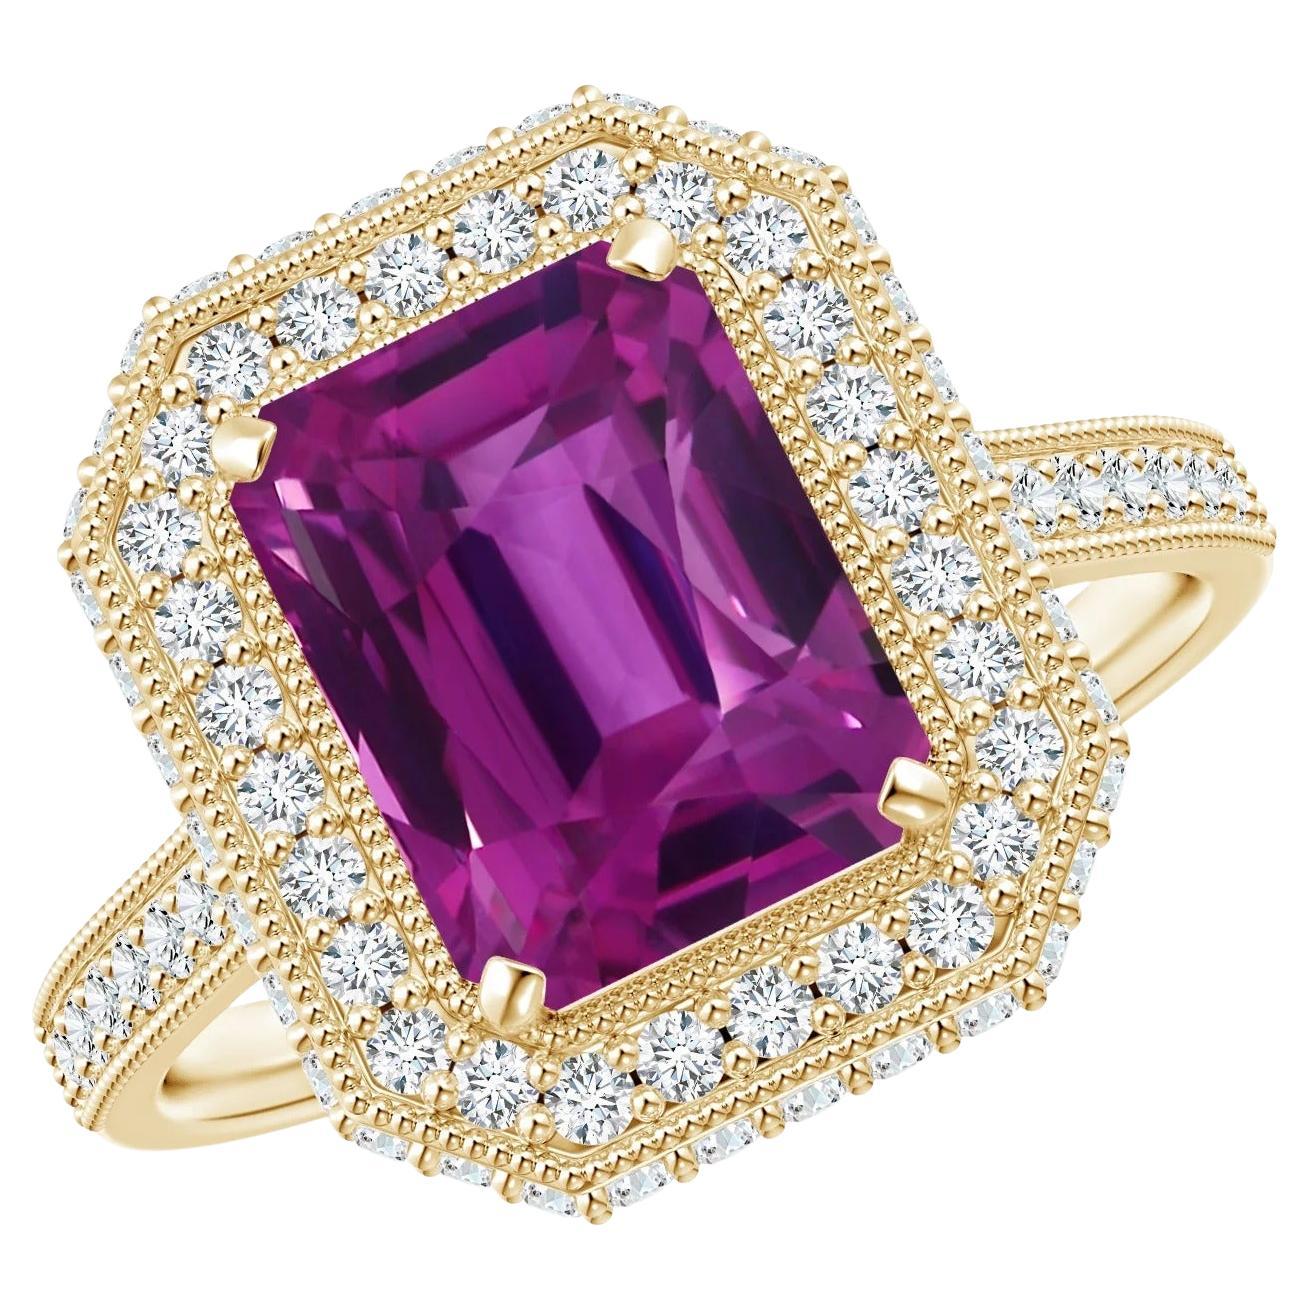 For Sale:  ANGARA GIA Certified Natural Emerald Cut Pink Sapphire Halo Ring in Yellow Gold